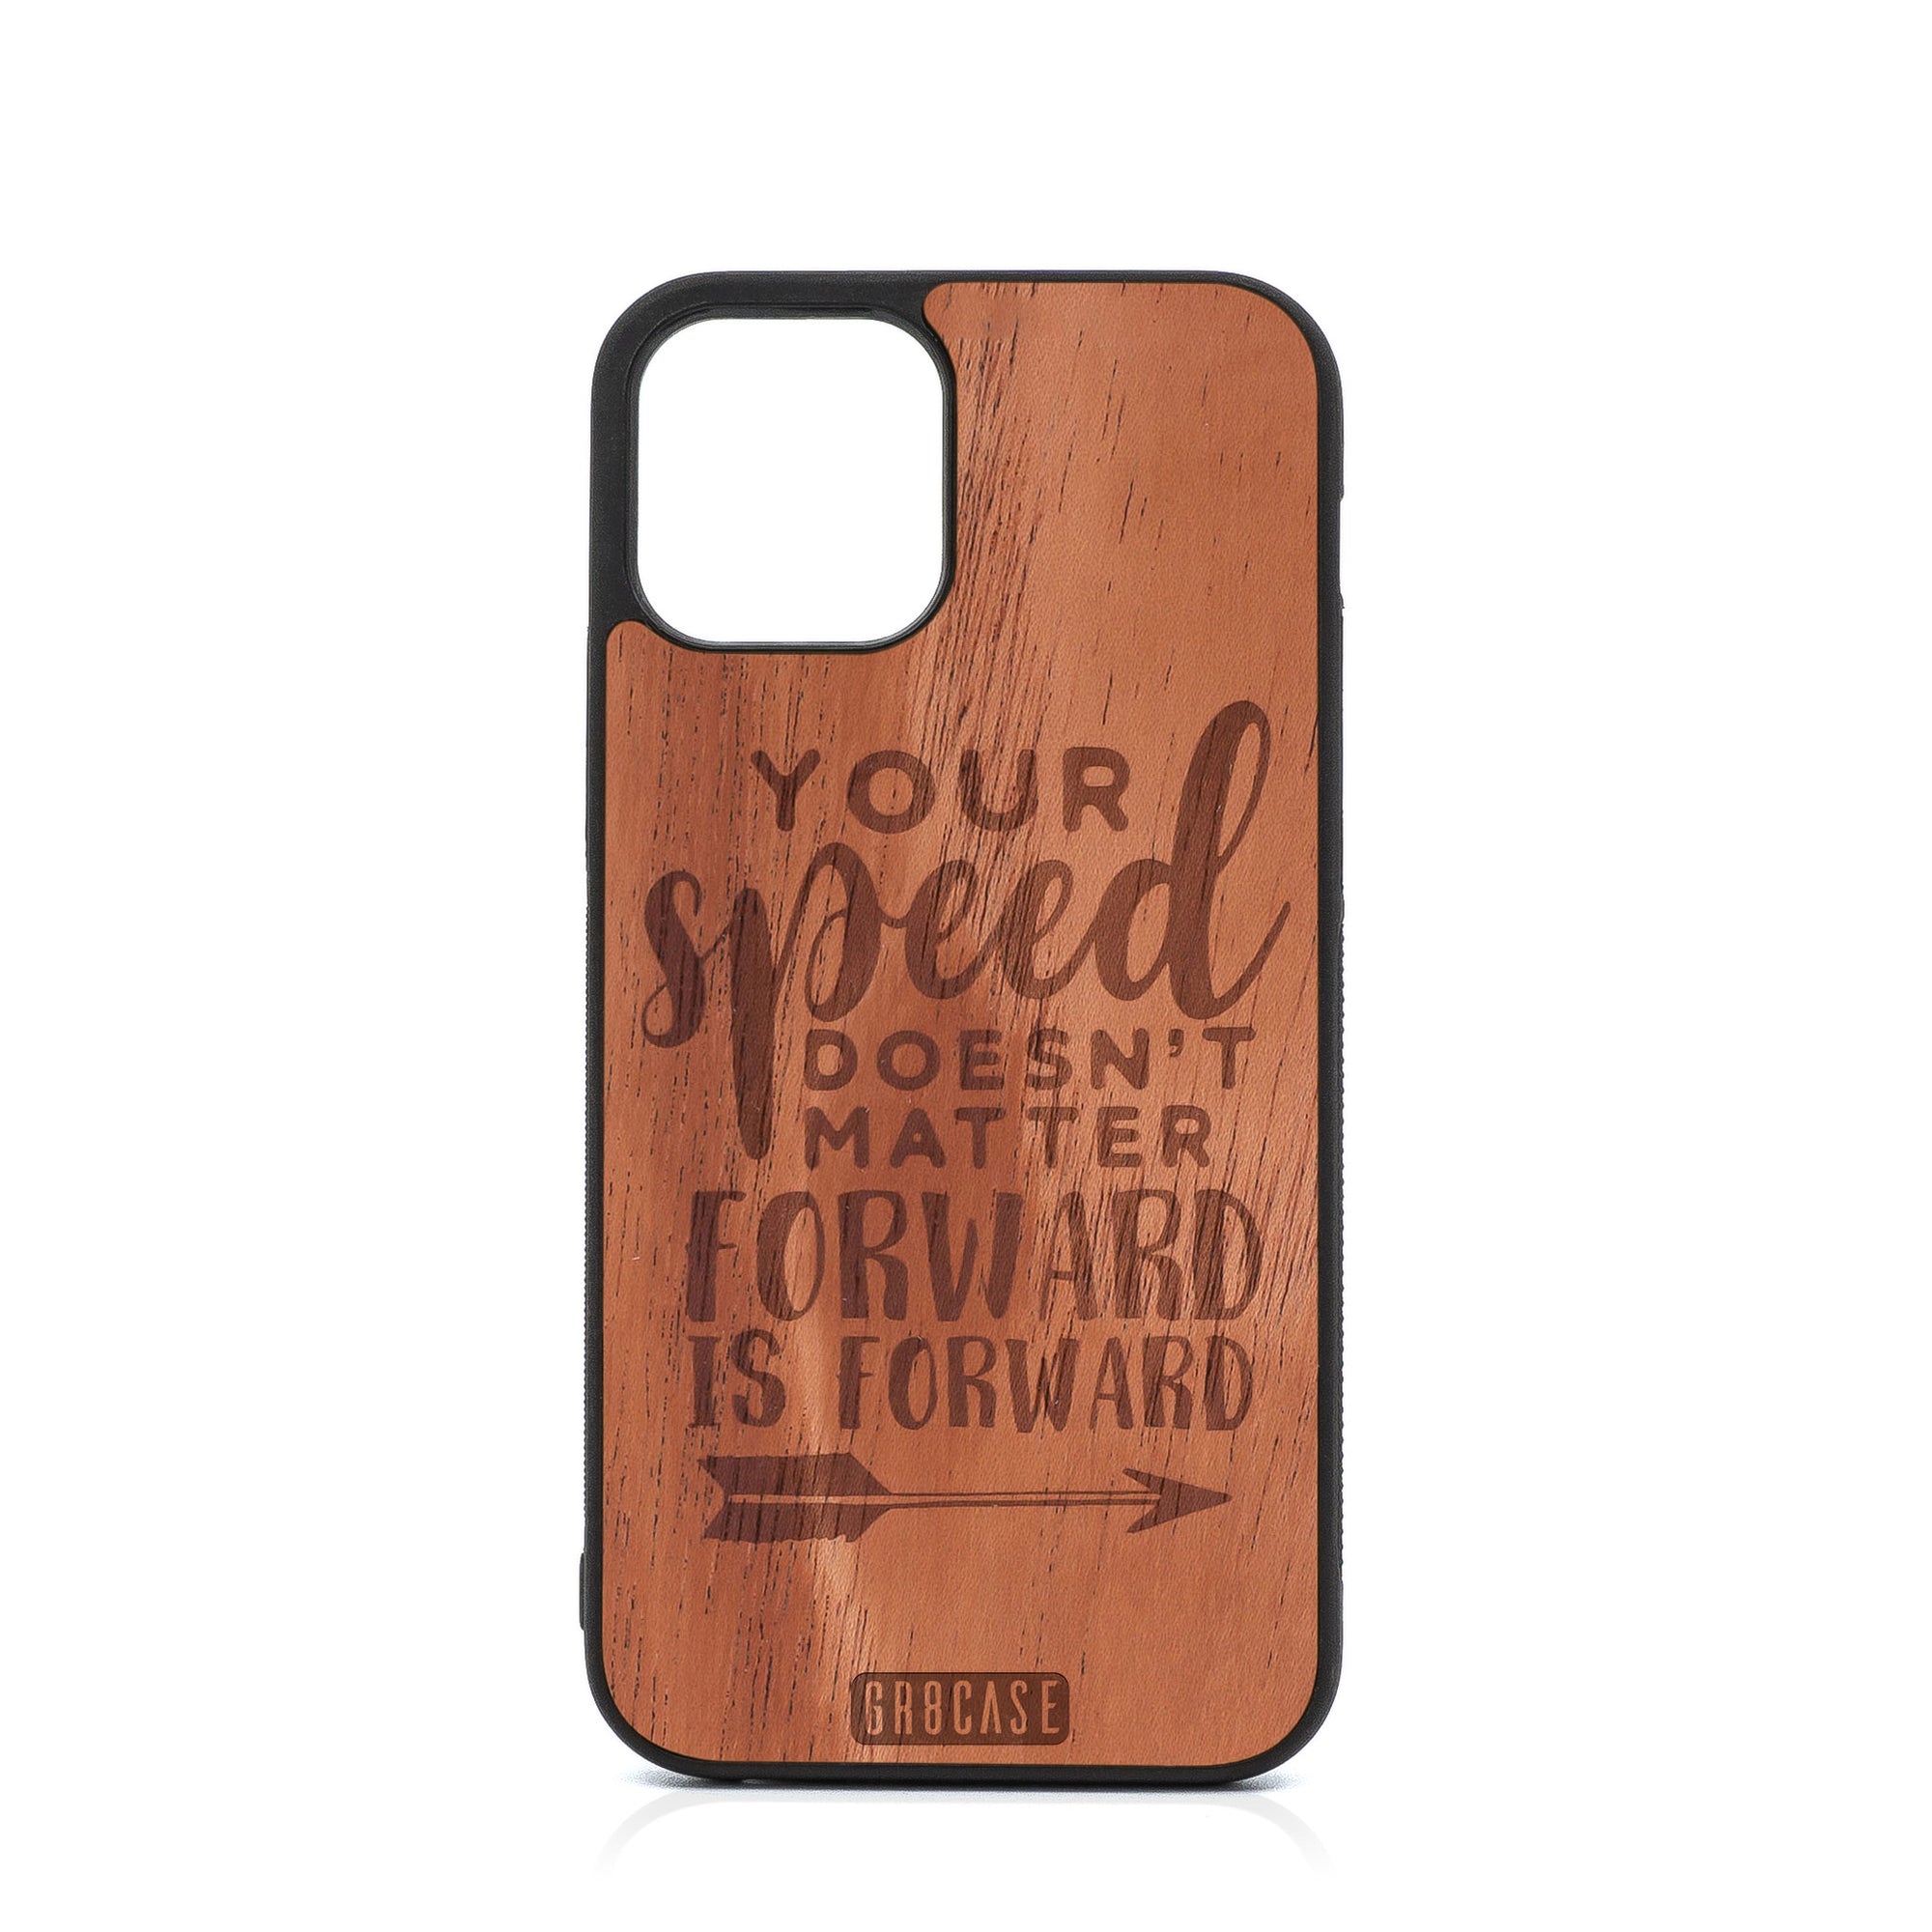 Your Speed Doesn't Matter Forward Is Forward Design Wood Case For iPhone 12 Pro